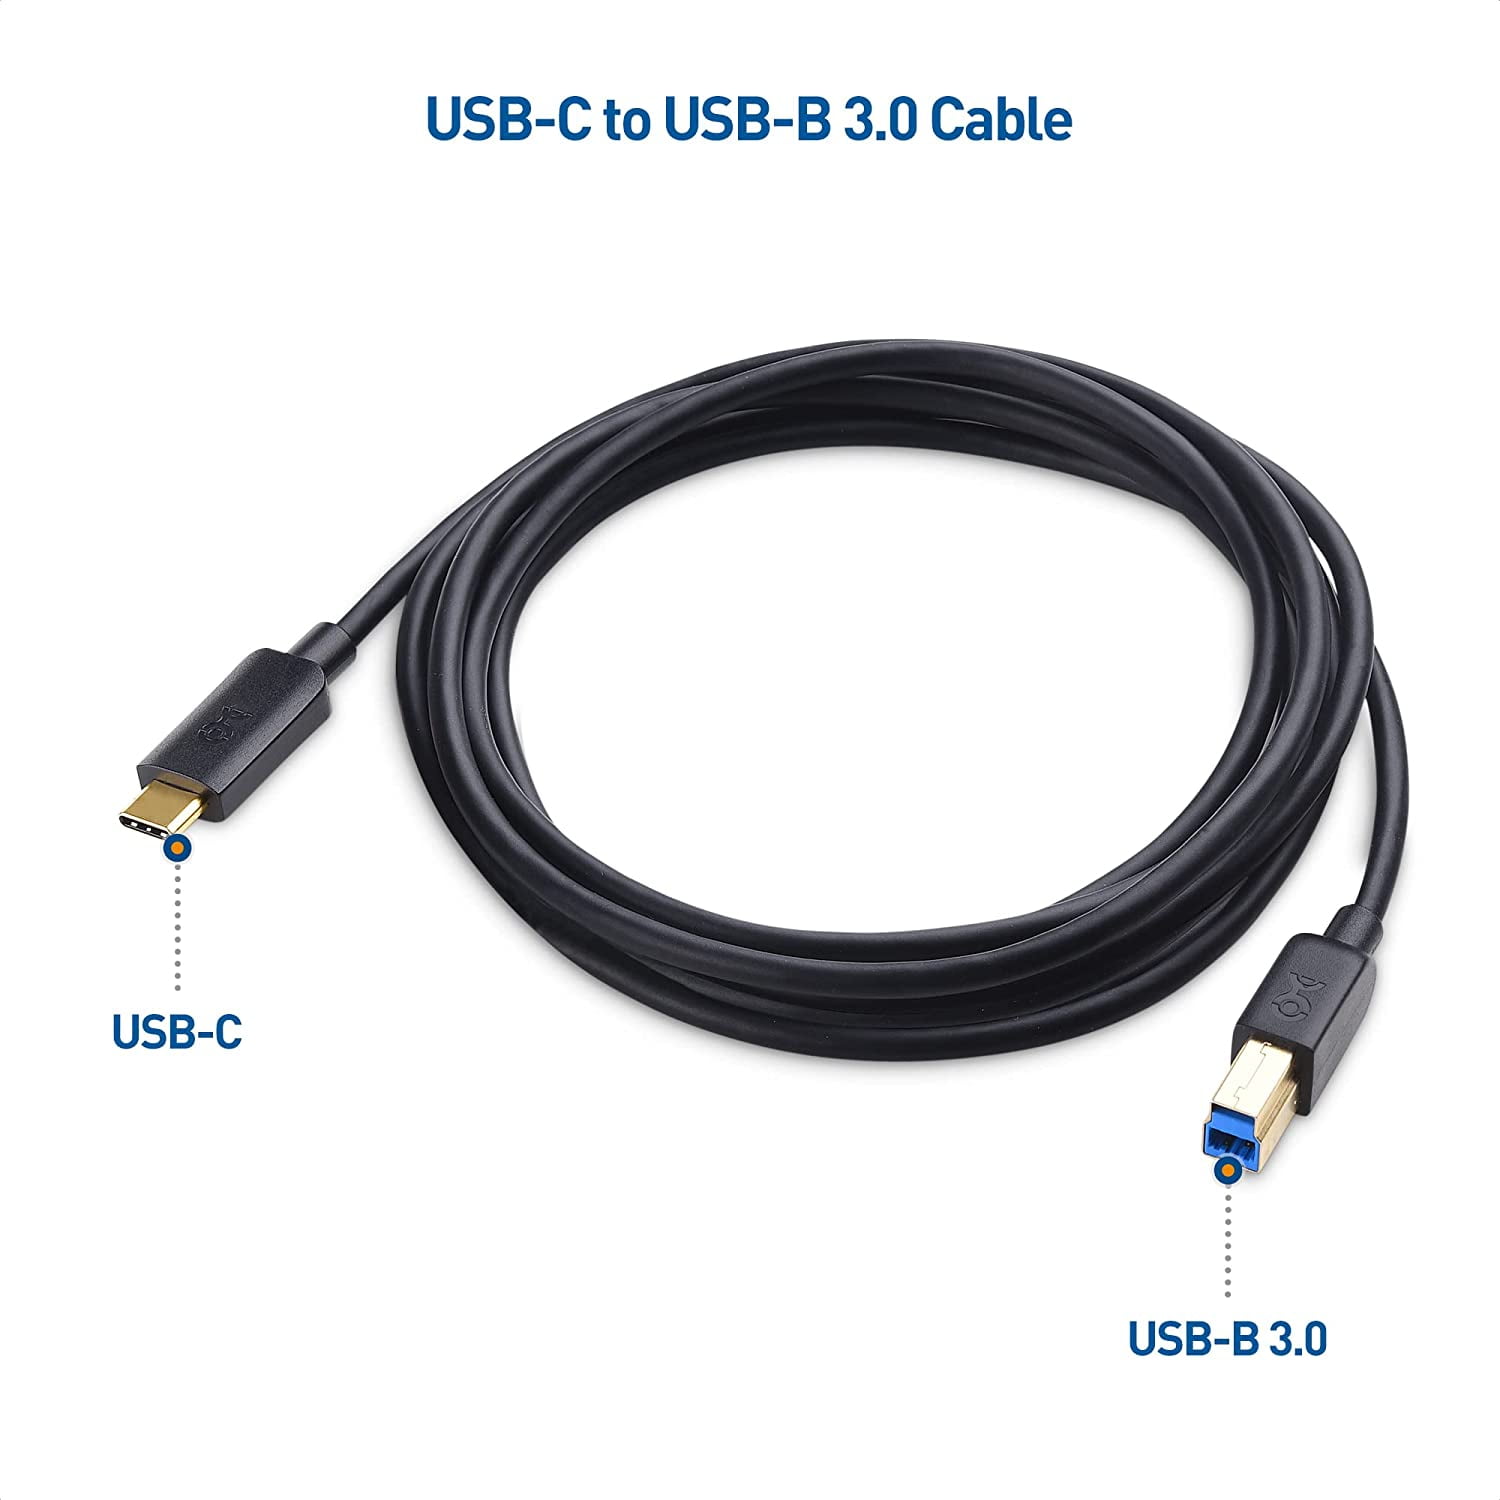 Cable Matters Type-C USB 3.1 Type B Cable (USB-C / USB C USB B 3.0 / Type-C  USB 3.1 to USB B ) in Black 3.3 Feet